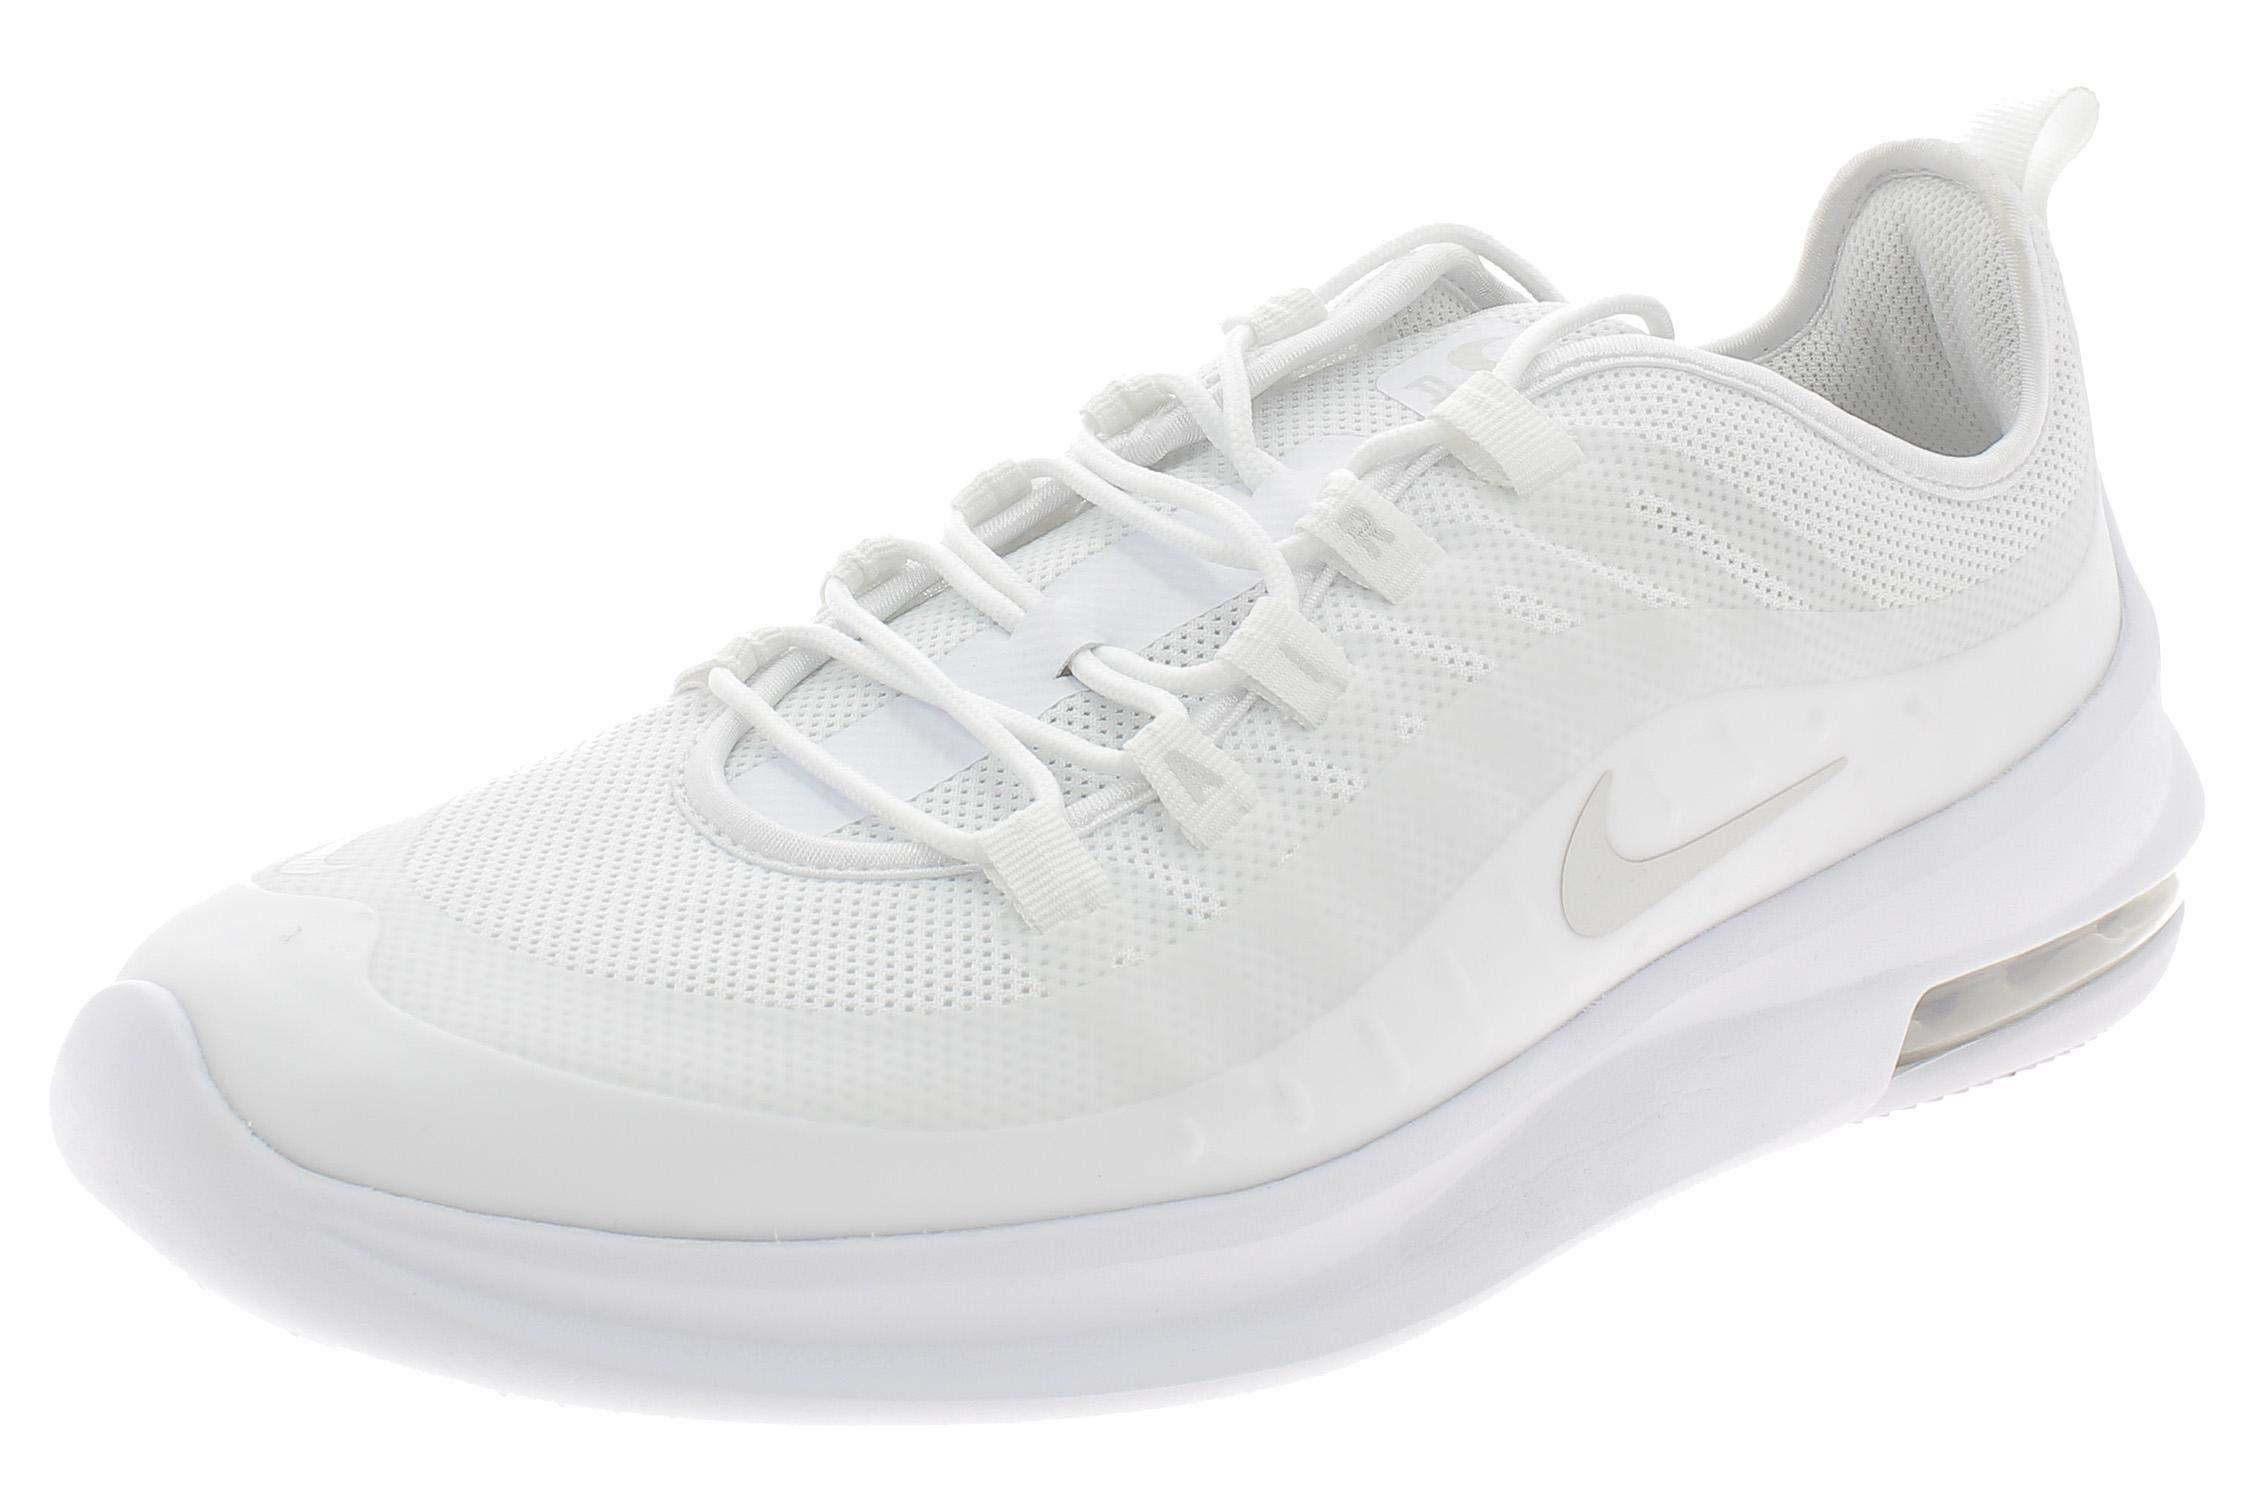 Nike Air Max Axis in White for Men - Save 67% - Lyst